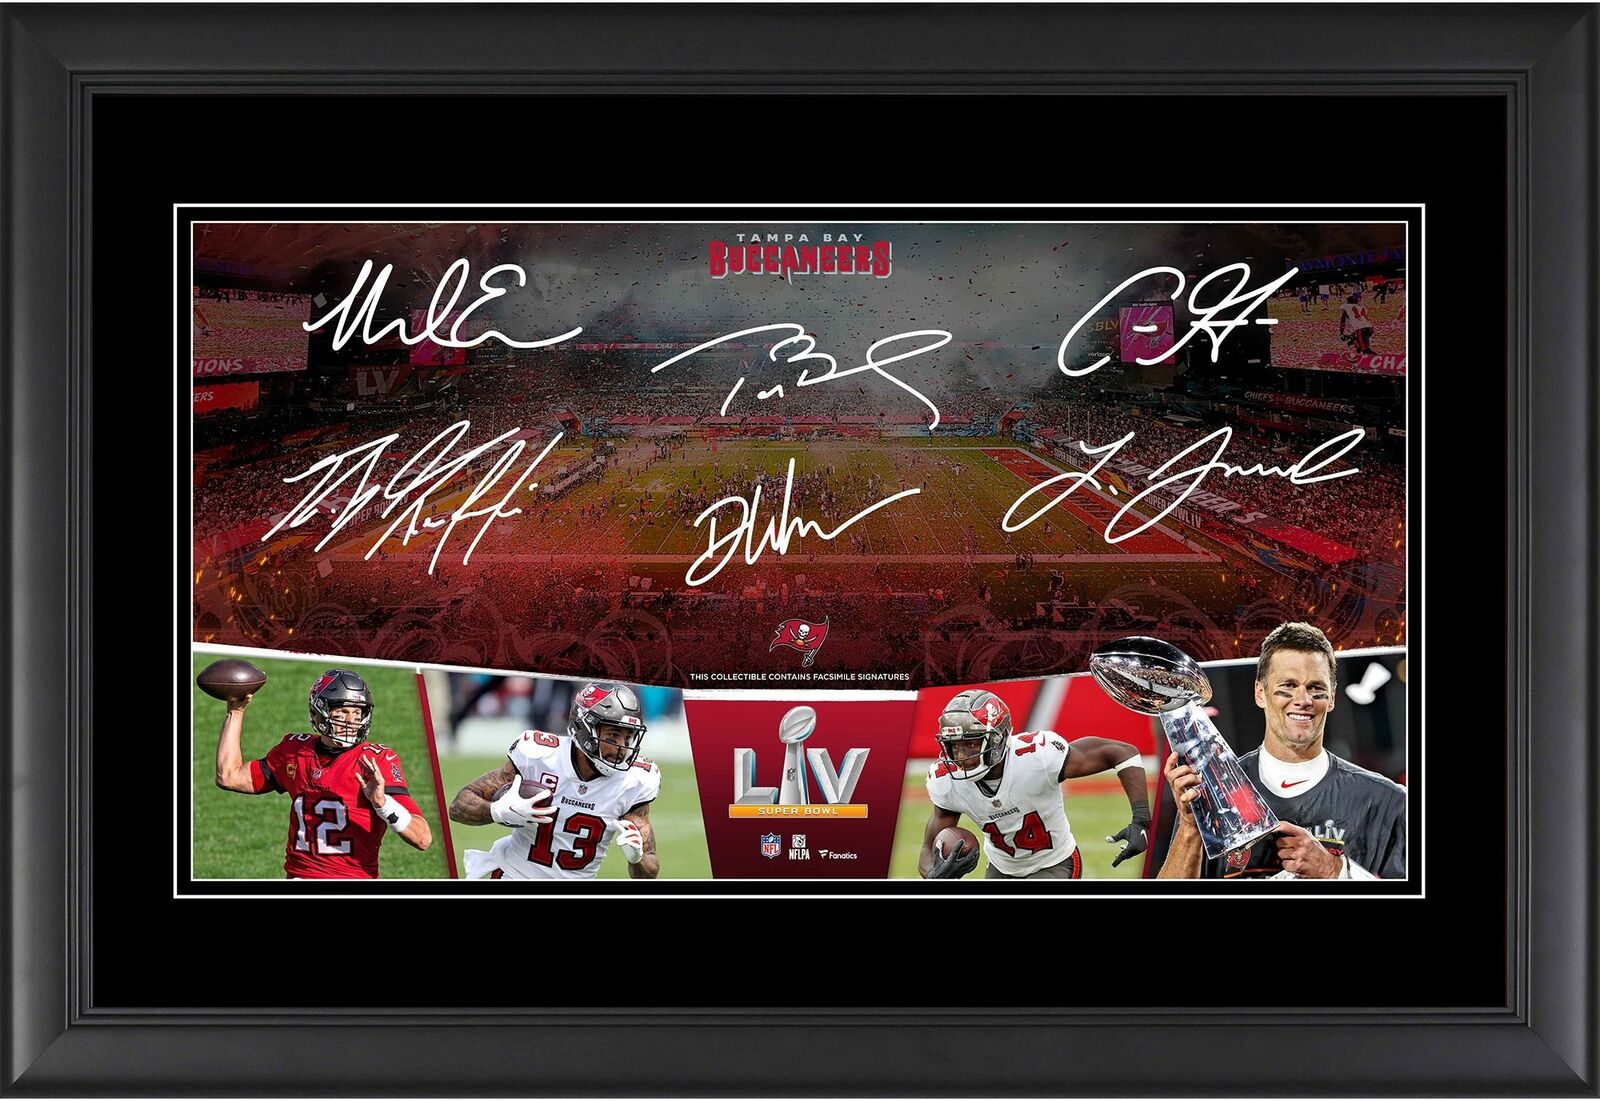 Tb Buccaneers Frmd 10" X 18" Sb Lv Champs Road To The Sb Pano & Facsimile Sigs